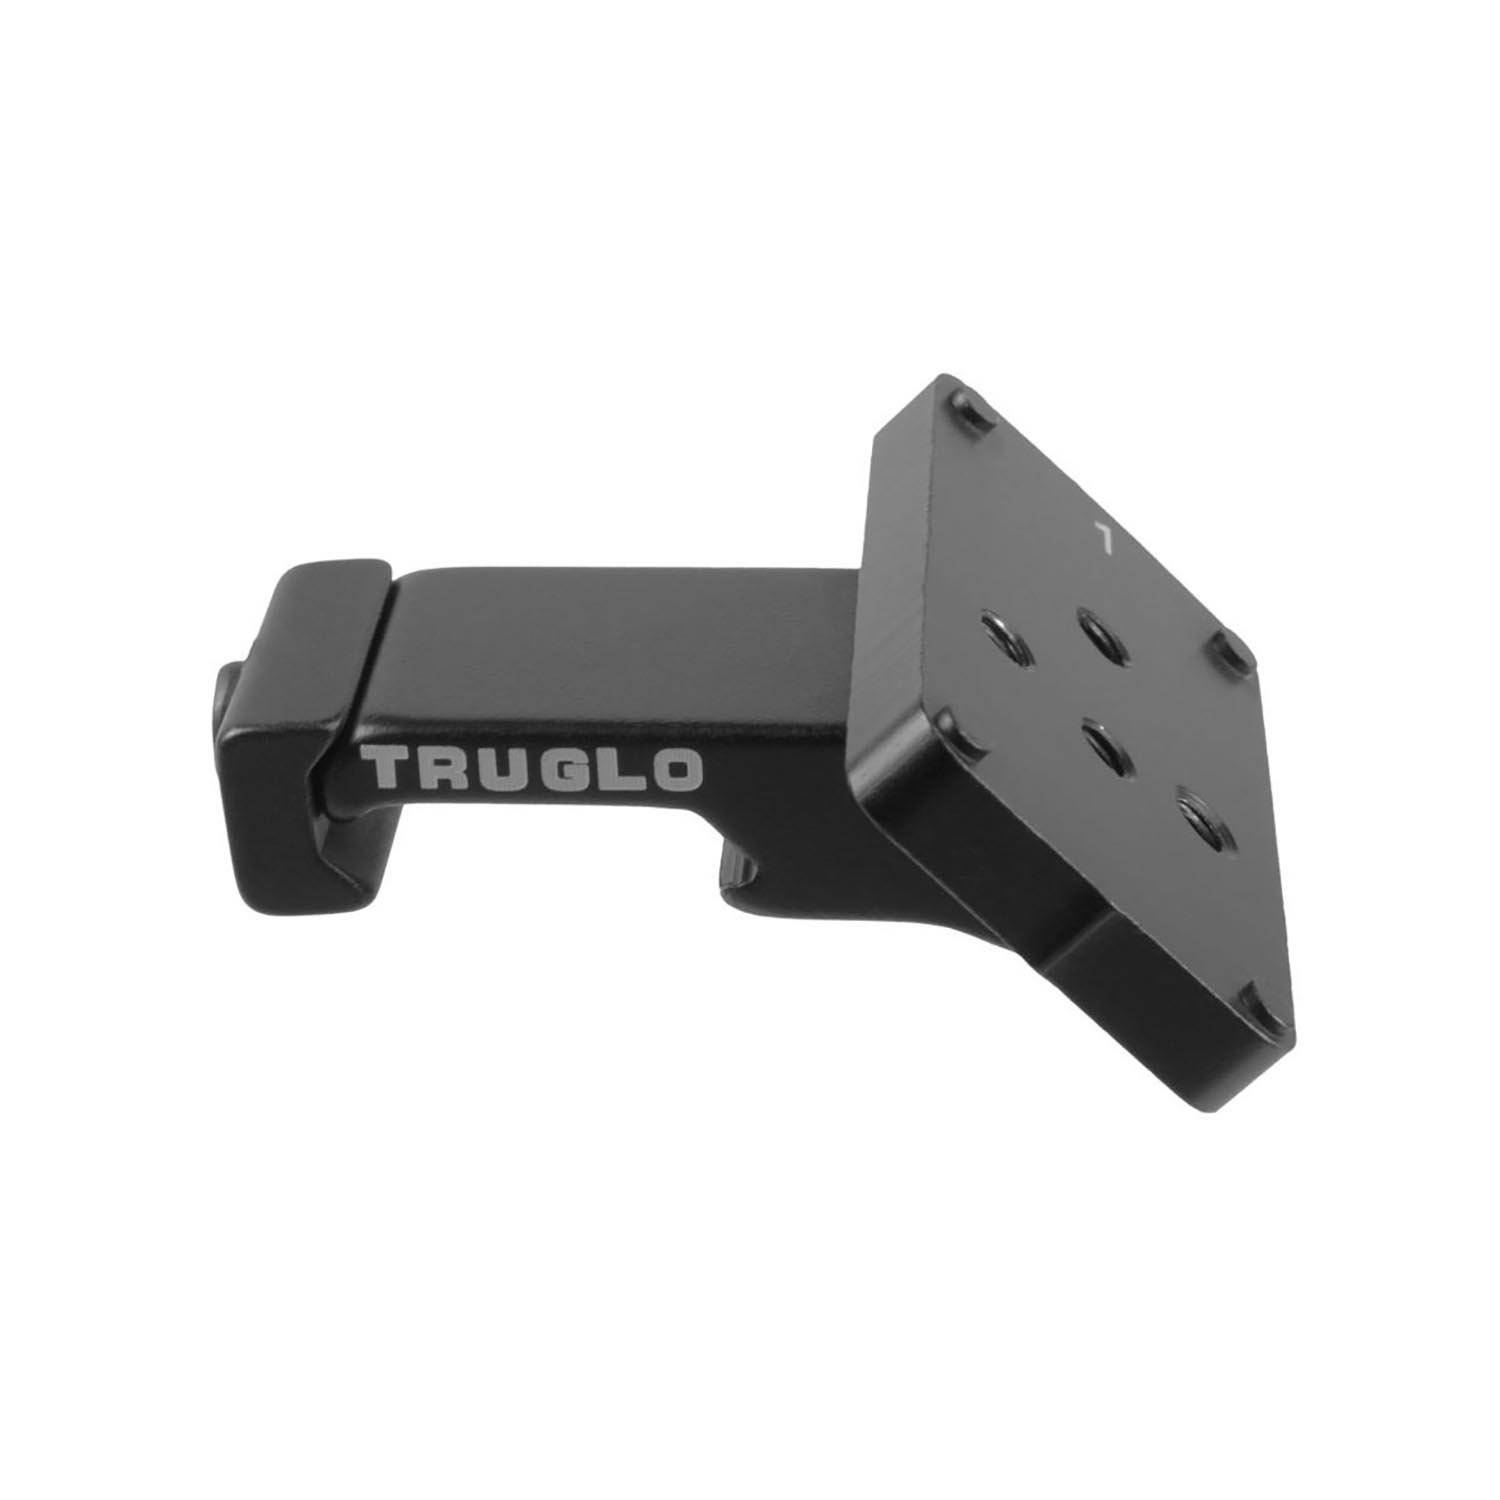 TruGlo 45 degree Offset Red Dot Sight Mount